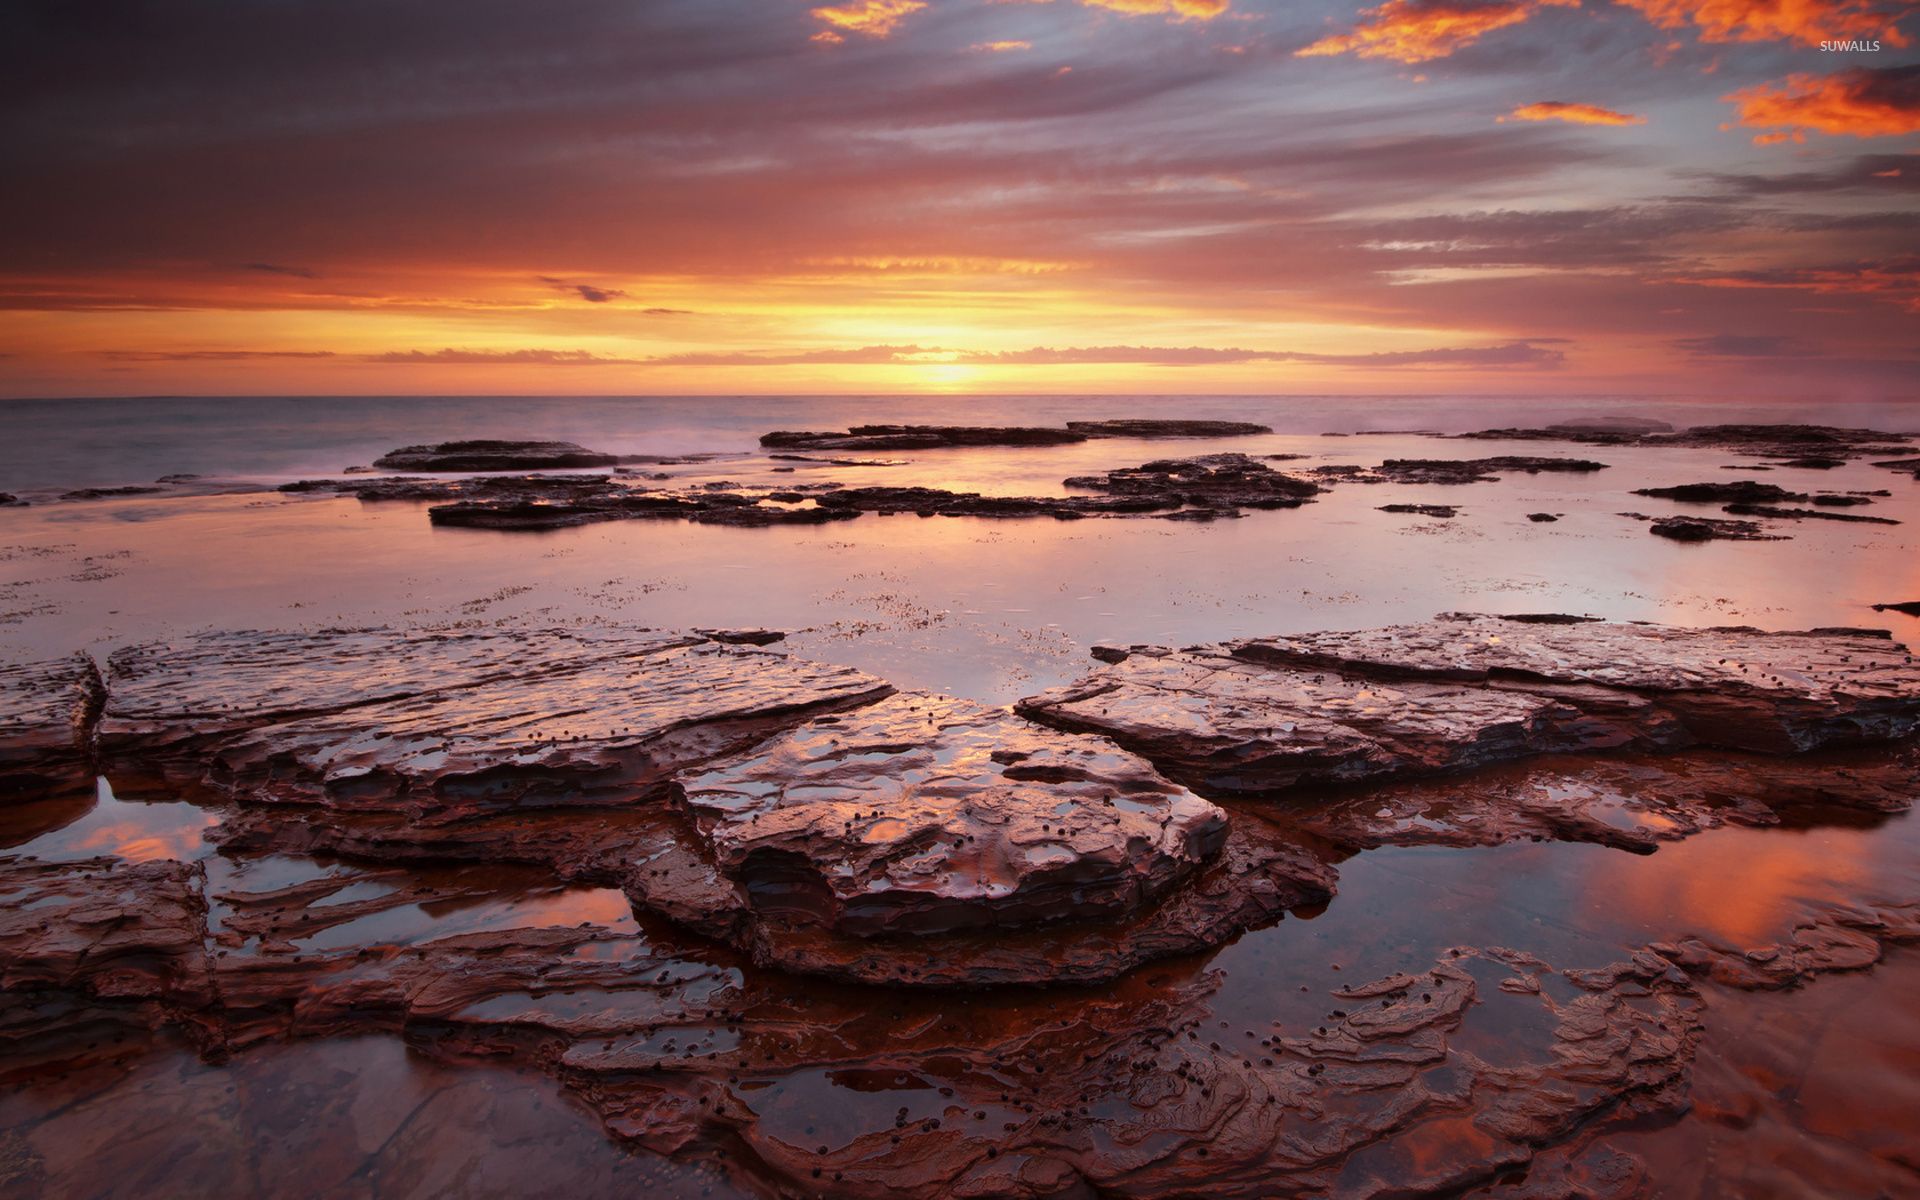 Amazing sunset reflecting in the wet rocky beach wallpaper